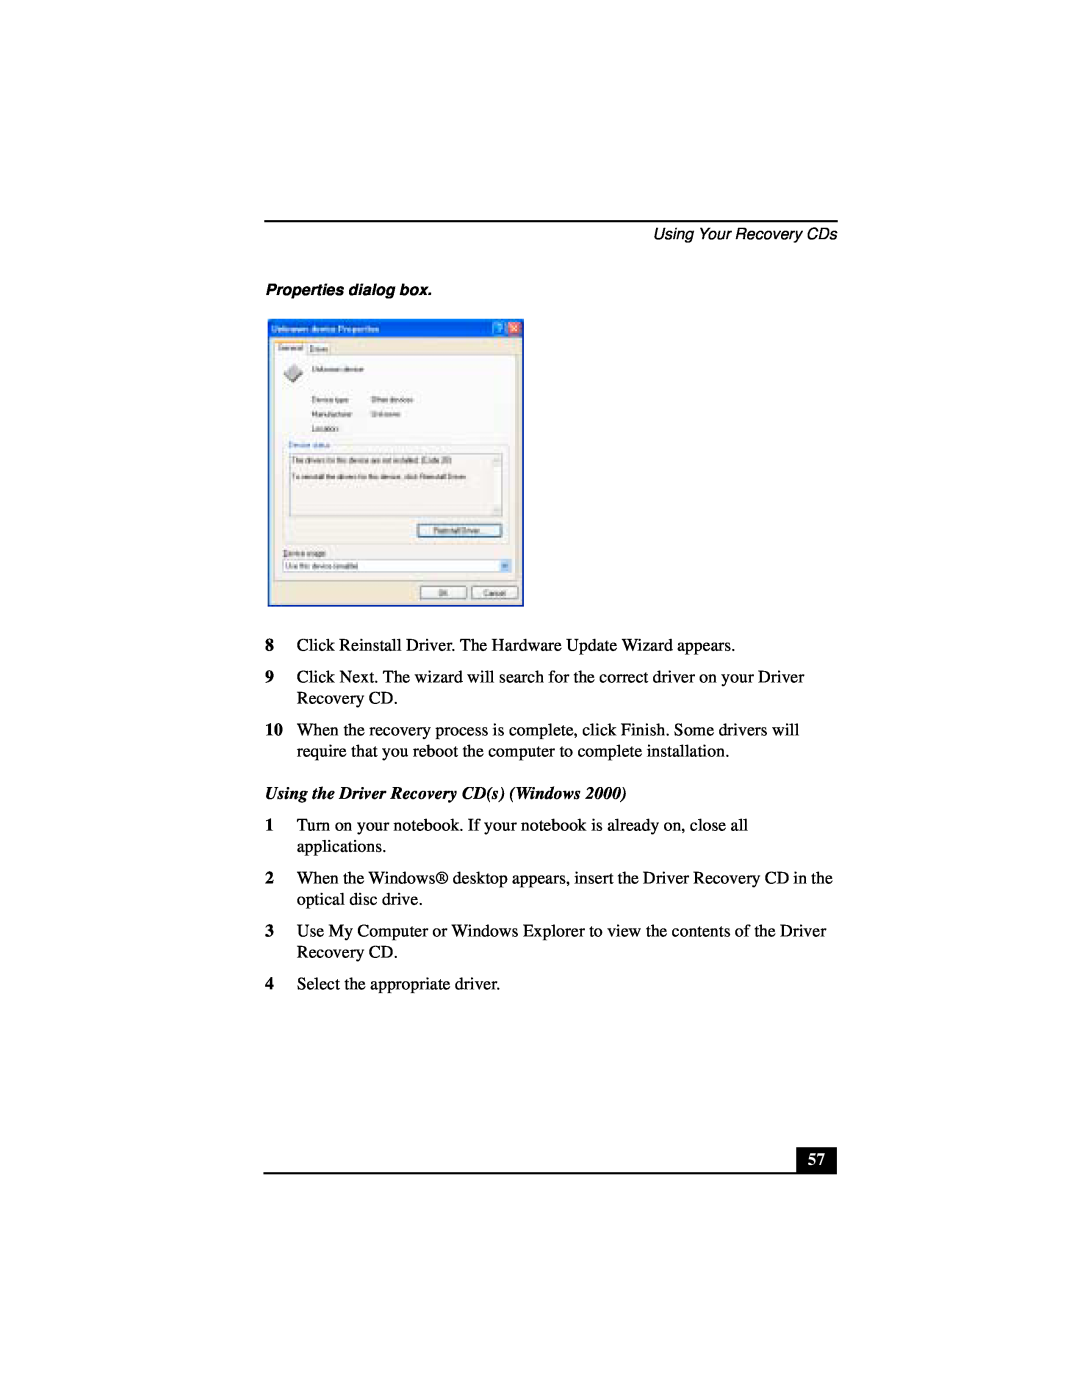 Sony PCG-R505DL, PCG-R505DSP, PCG-R505DSK service manual Using the Driver Recovery CDs Windows, Properties dialog box 